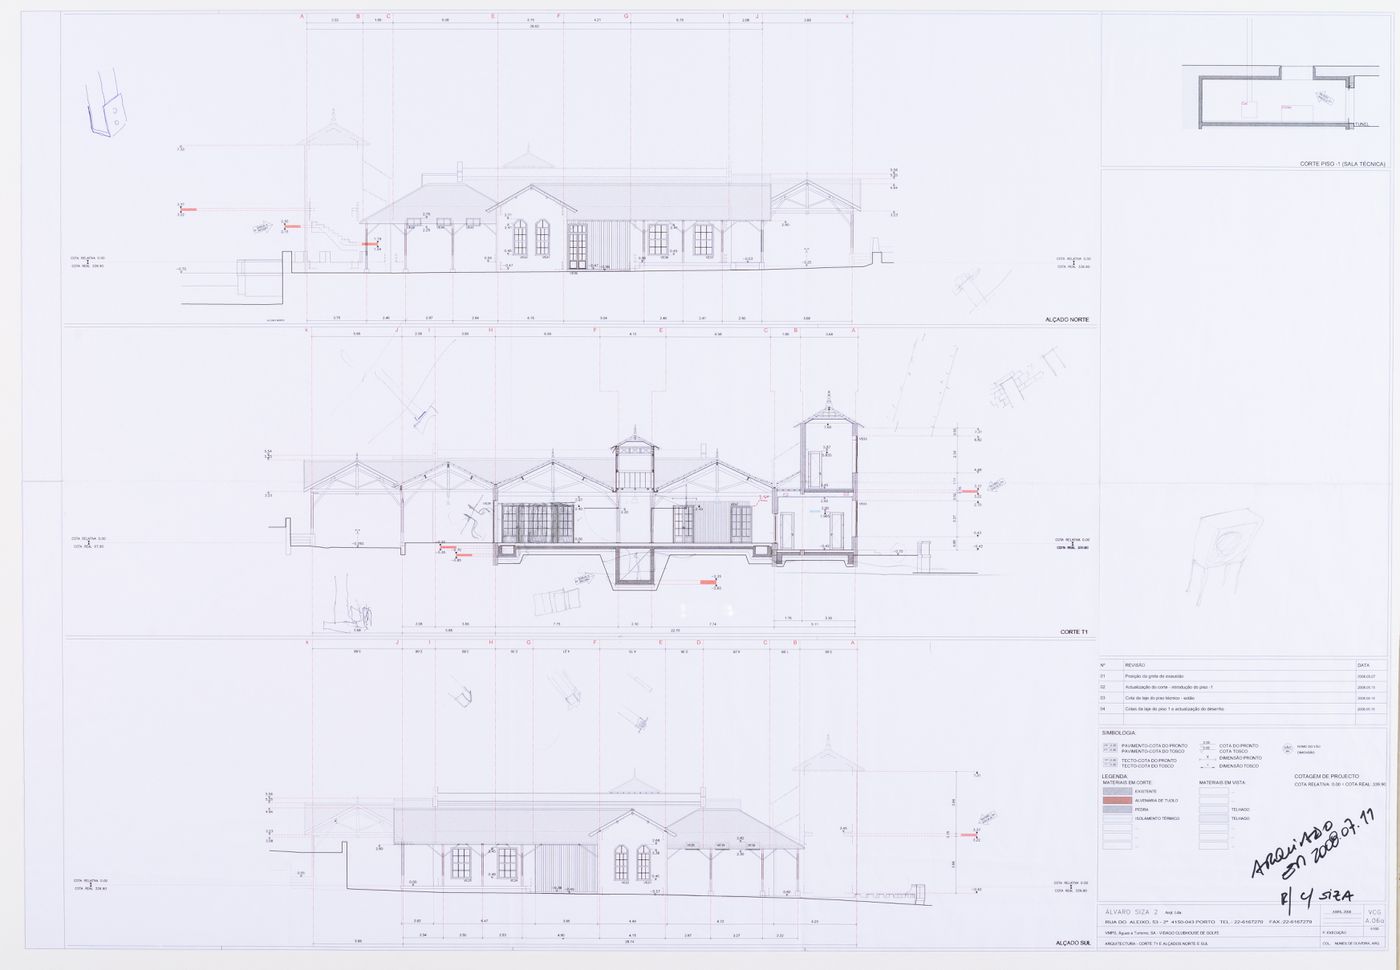 Annotated elevations and sections for Clubhouse de Vidago, Vidago